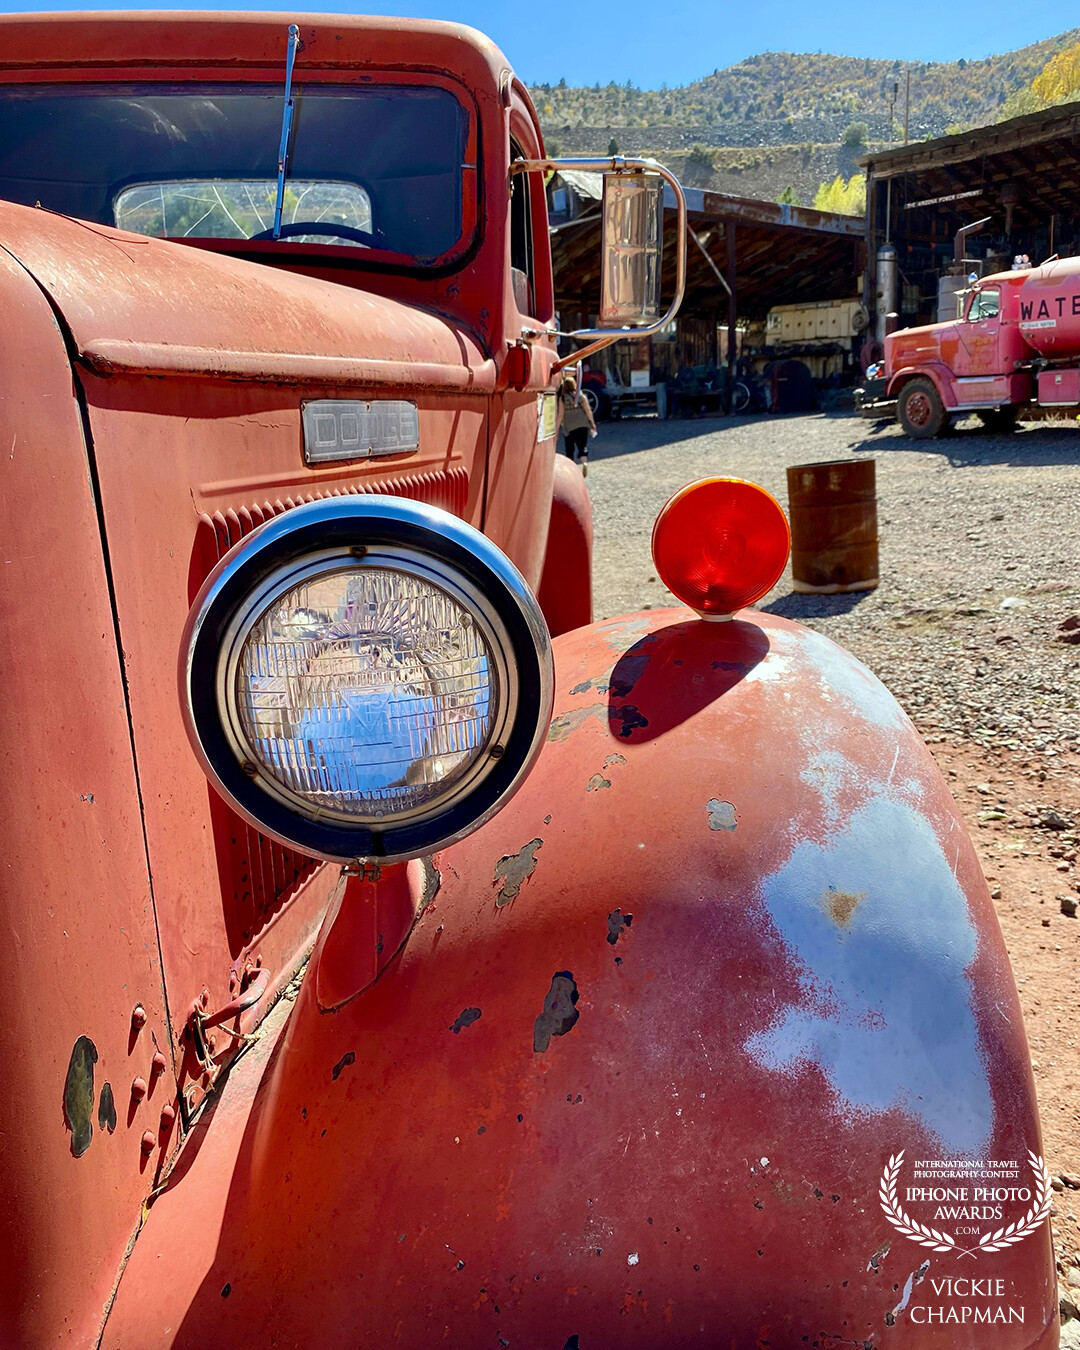 I always love to photograph old autos. This was captured at The Gold King Mine near Jerome, AZ, the USA.